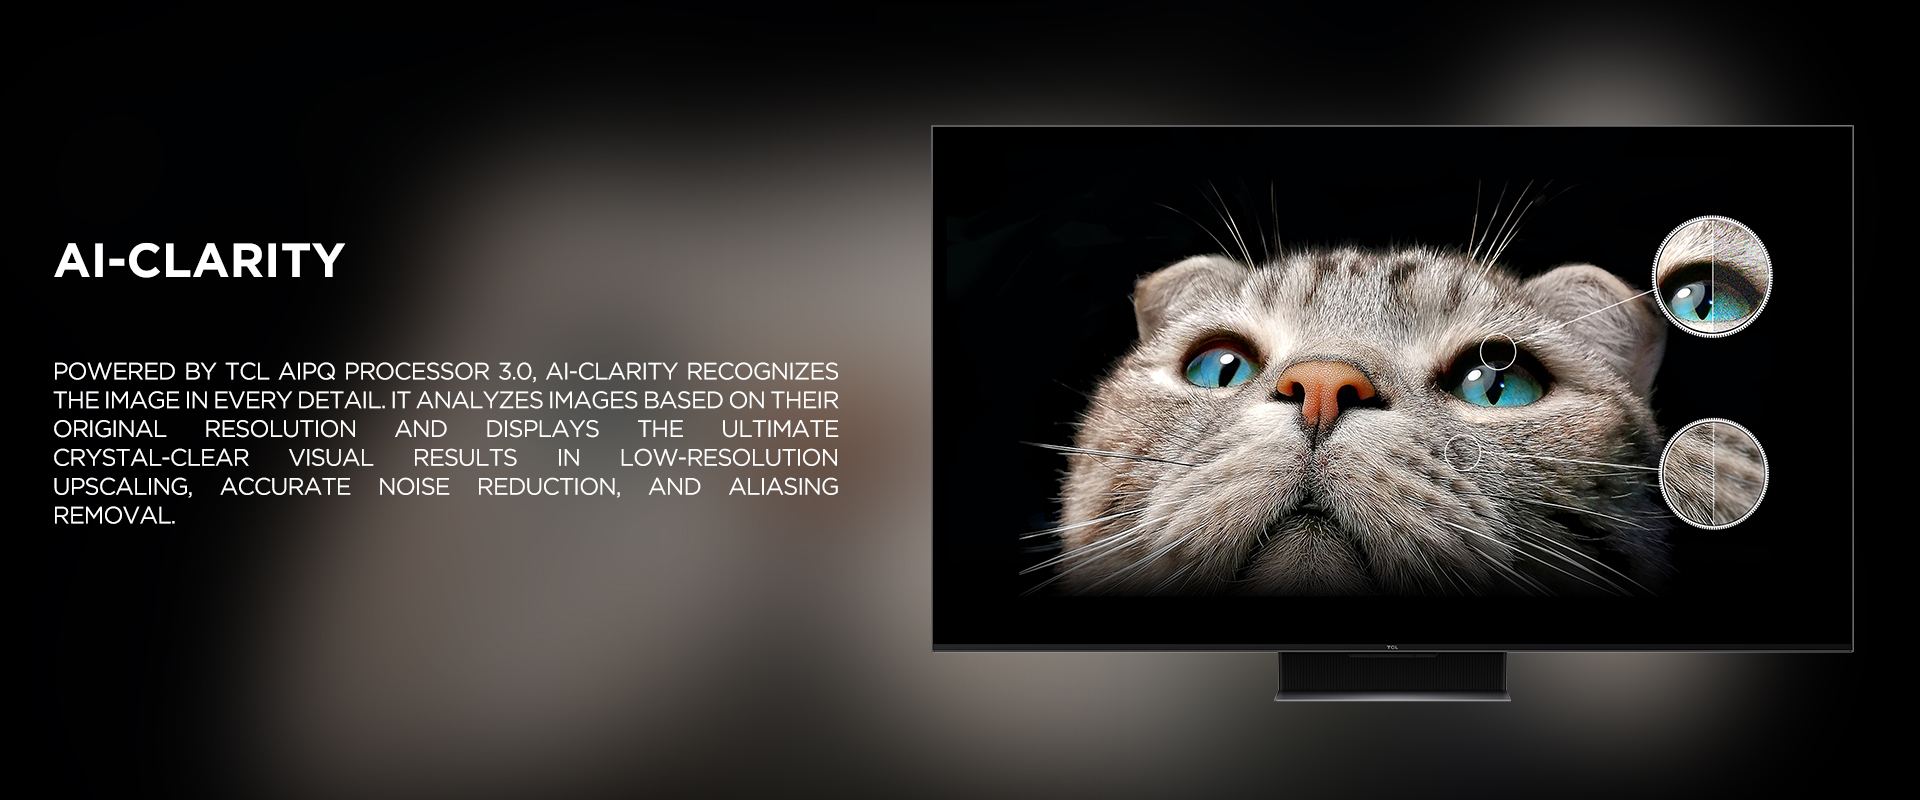 Ai-CLARITY - Powered by TCL AiPQ Processor 3.0, Ai-Clarity recognizes the image in every detail. It analyzes images based on their original resolution and displays the ultimate crystal-clear visual results in low-resolution upscaling, accurate noise reduction, and aliasing removal.